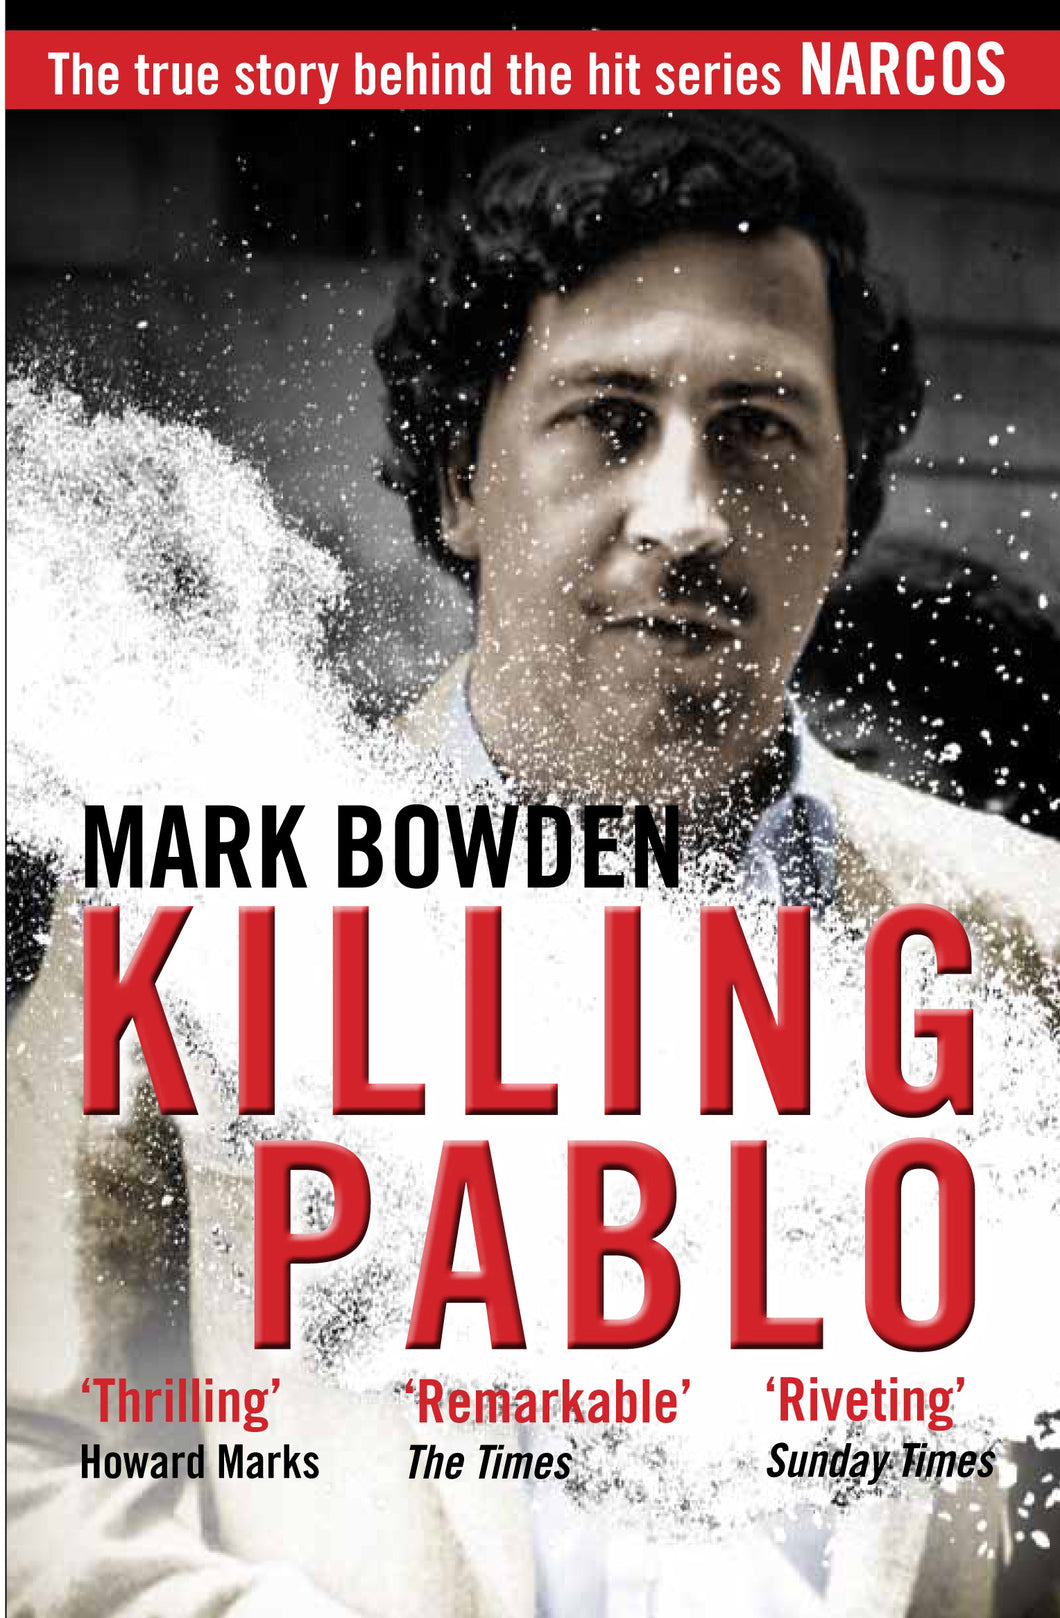 Killing Pablo by Mark Bowden: stock image of front cover.